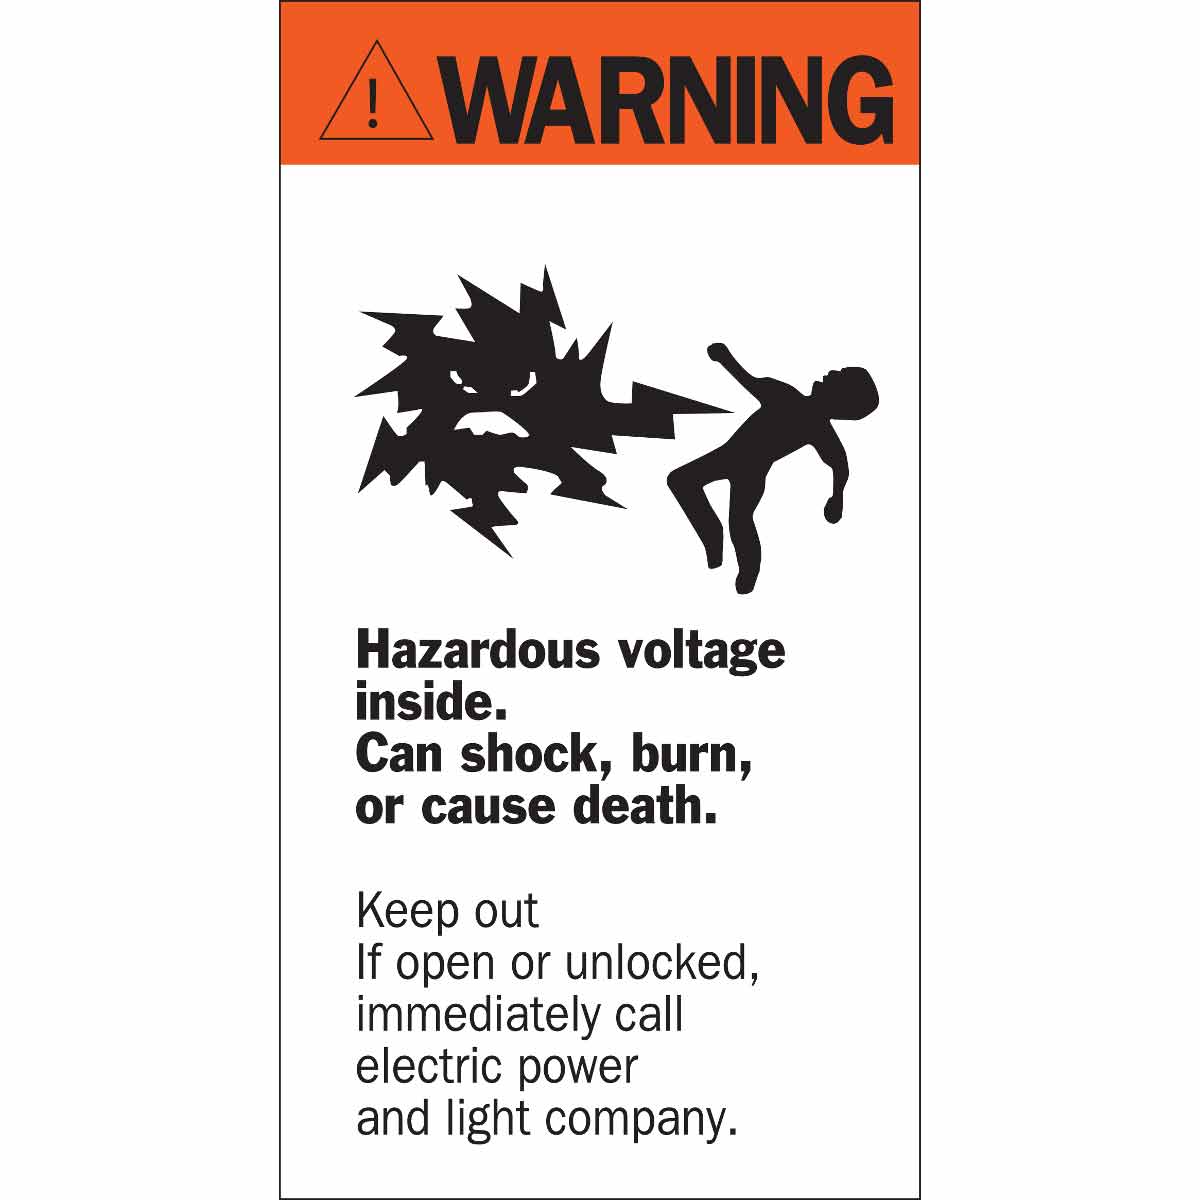 Electrical Labels WARNING CAUTION DANGER PERIODIC INSPECT VOLTAGE RCD b 